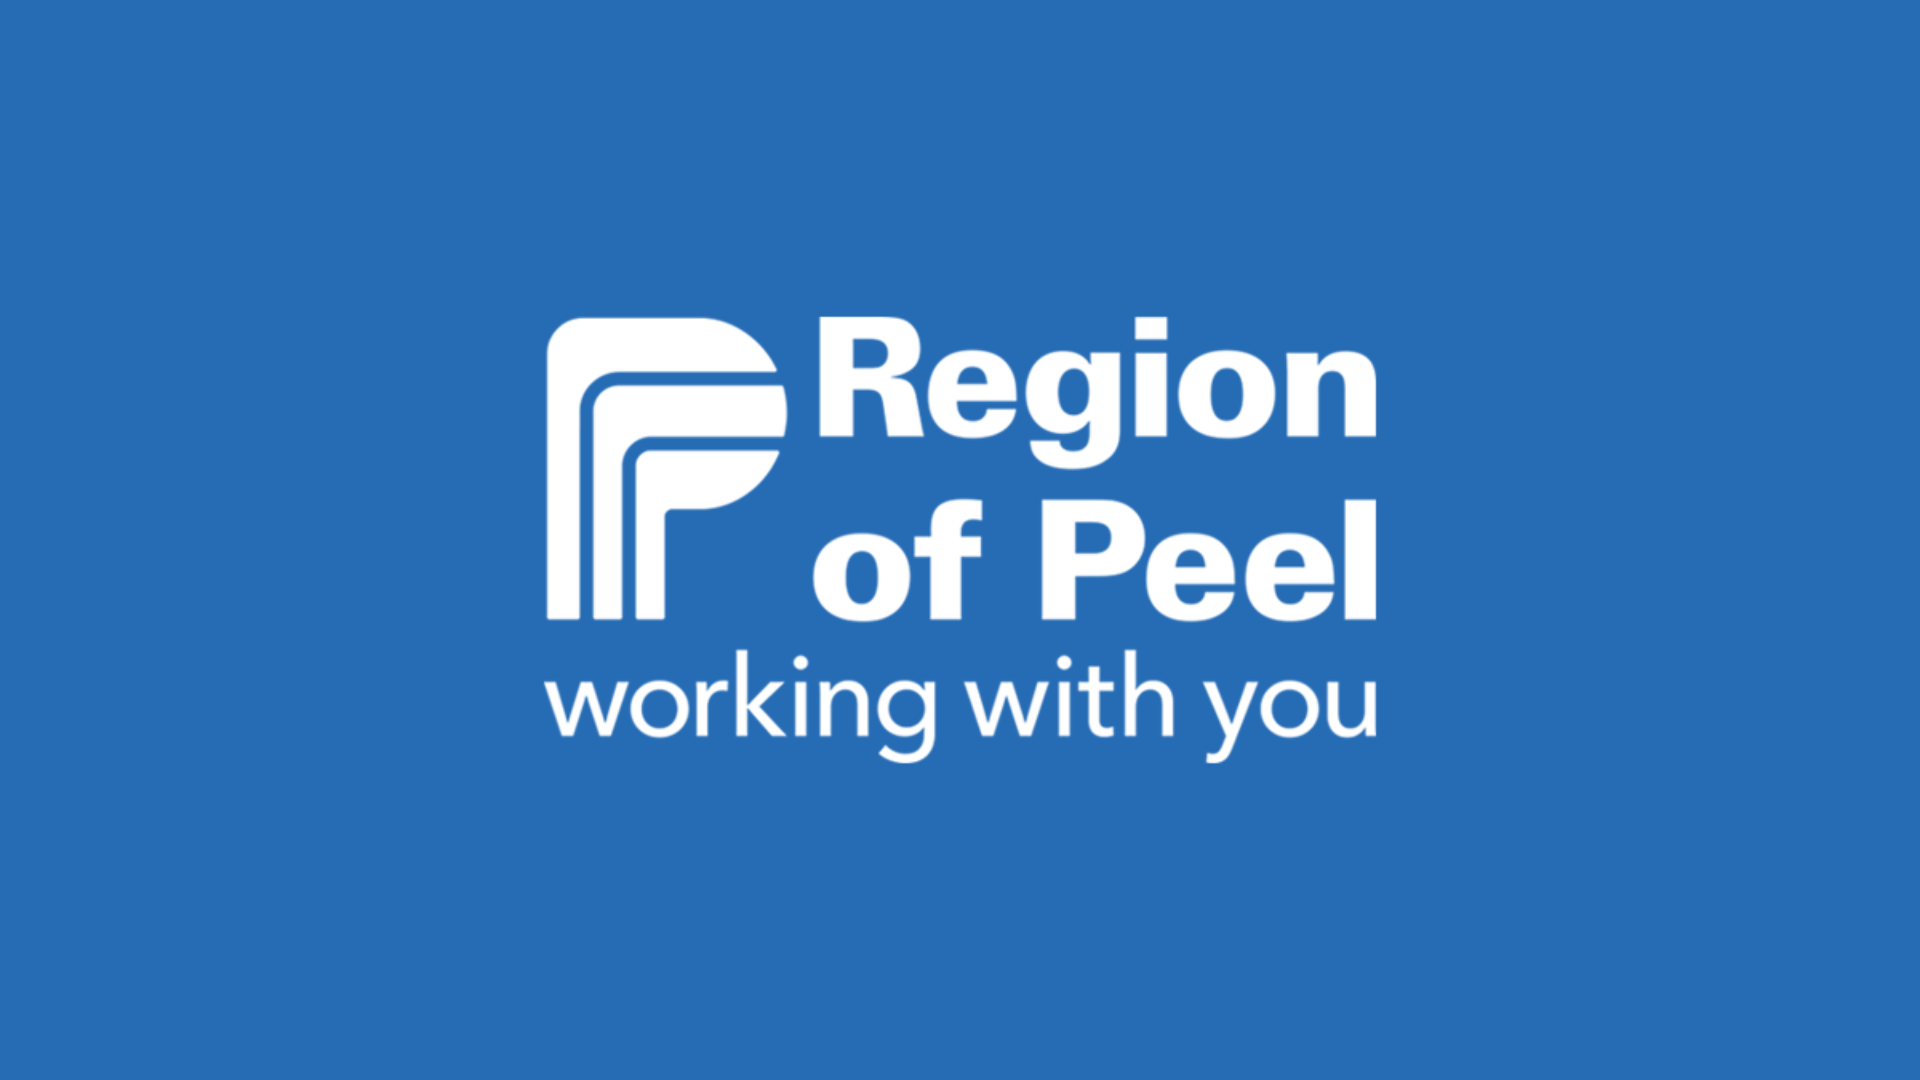 Ontario Appoints Transition Board to Oversee Dissolution of Peel Region